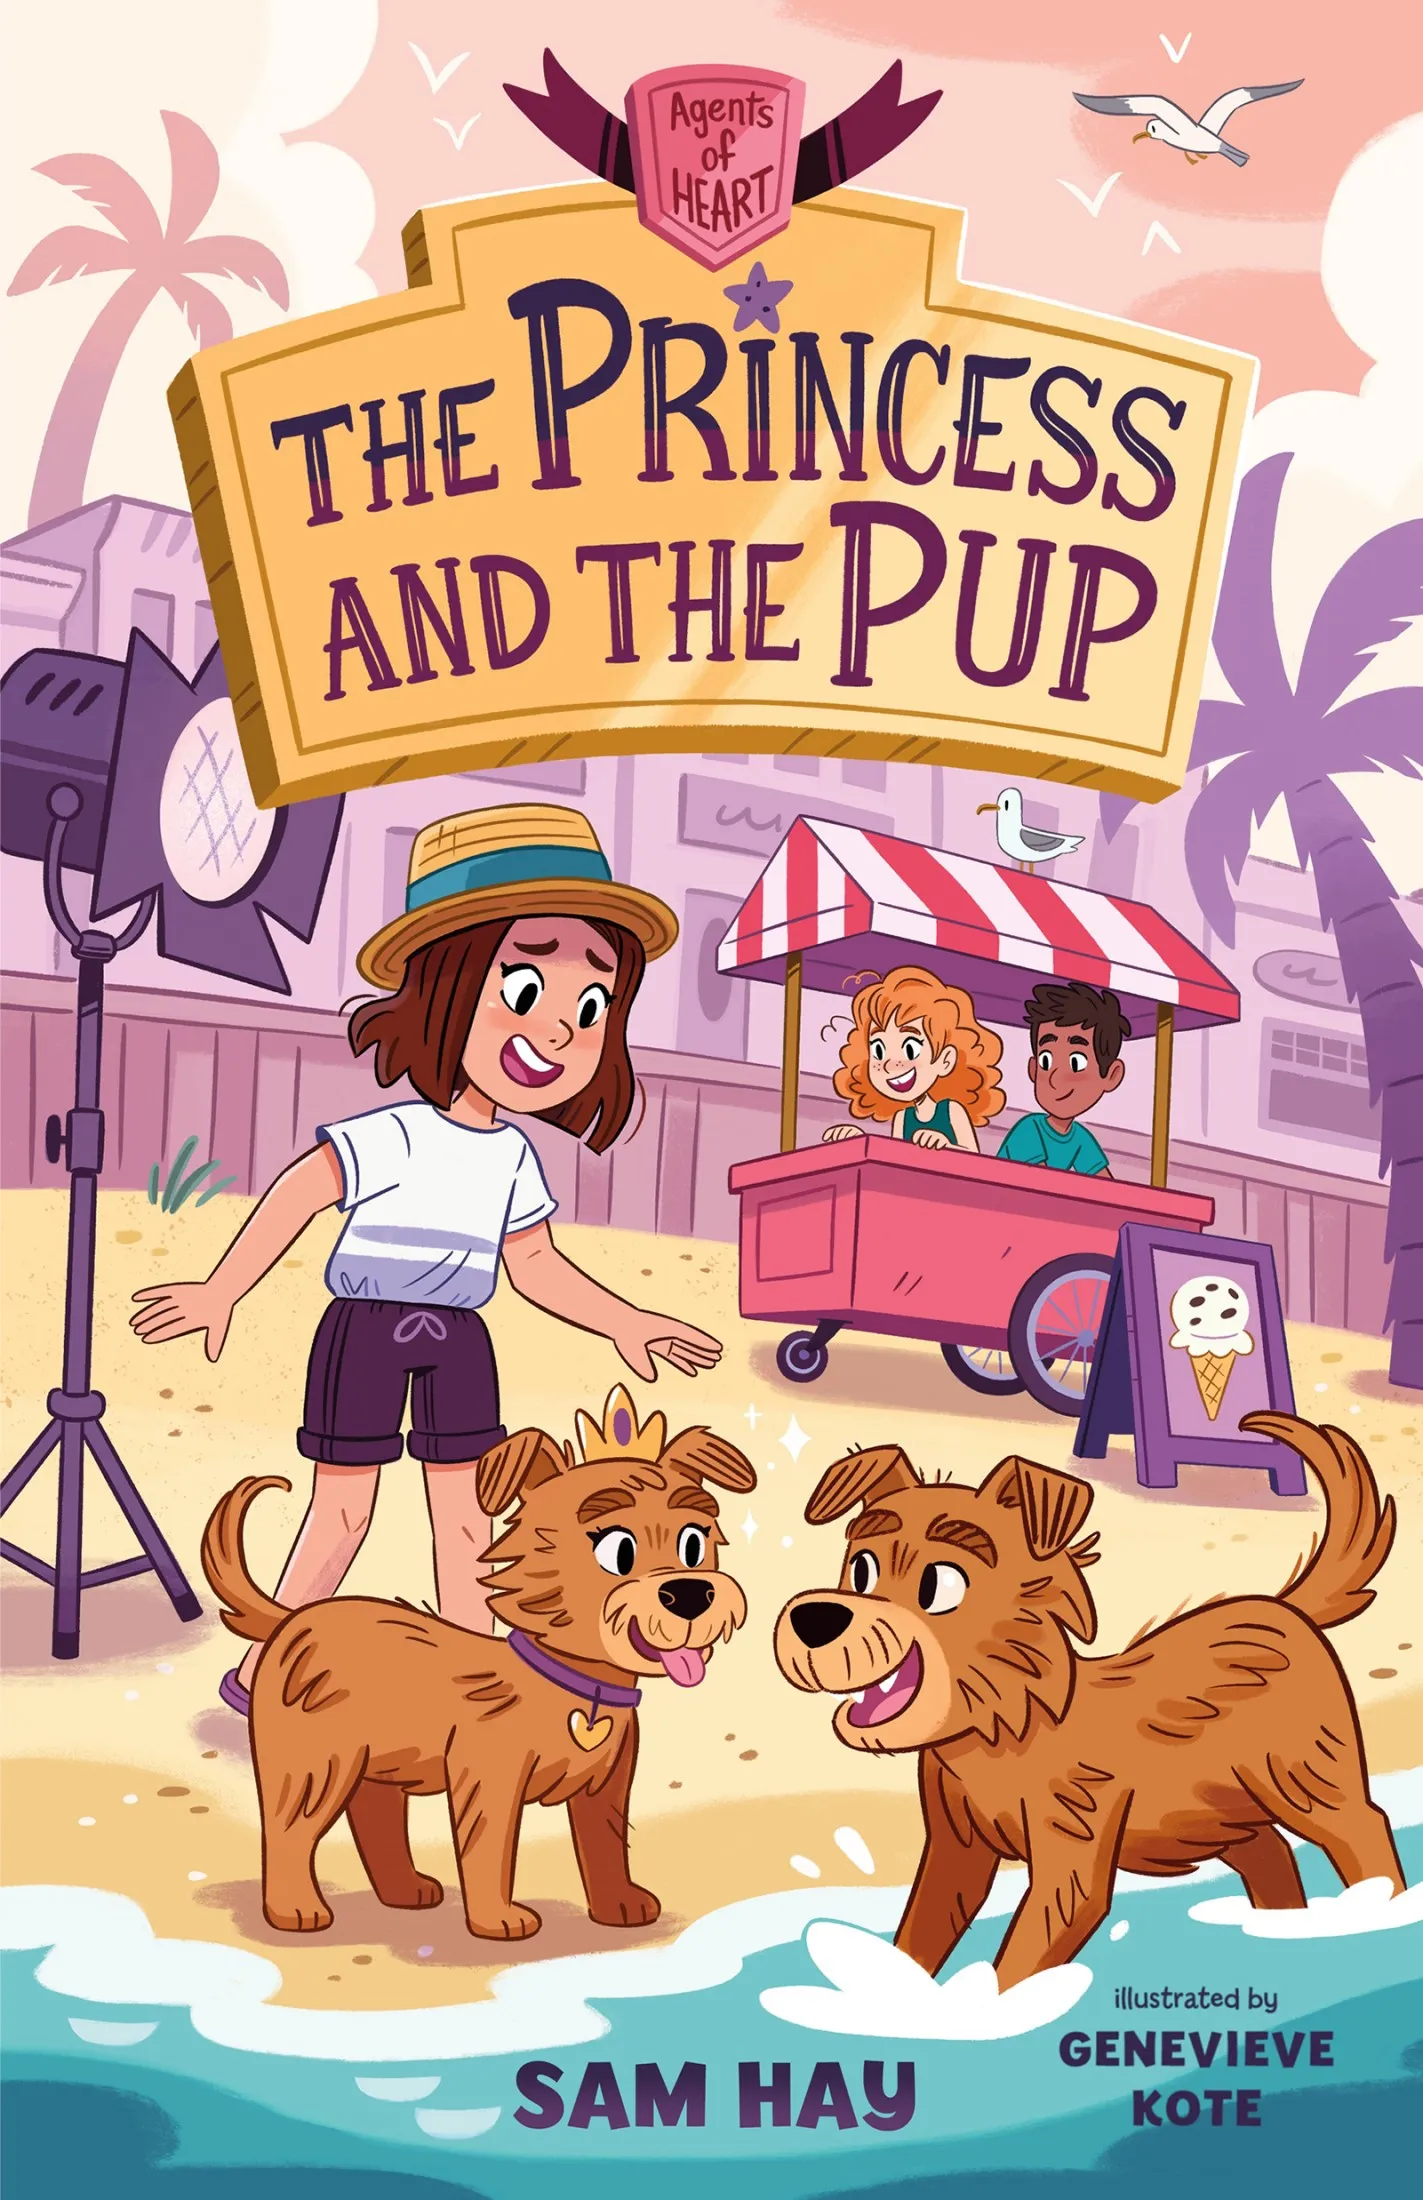 The Princess and the Pup (Agents of H.E.A.R.T. #3)